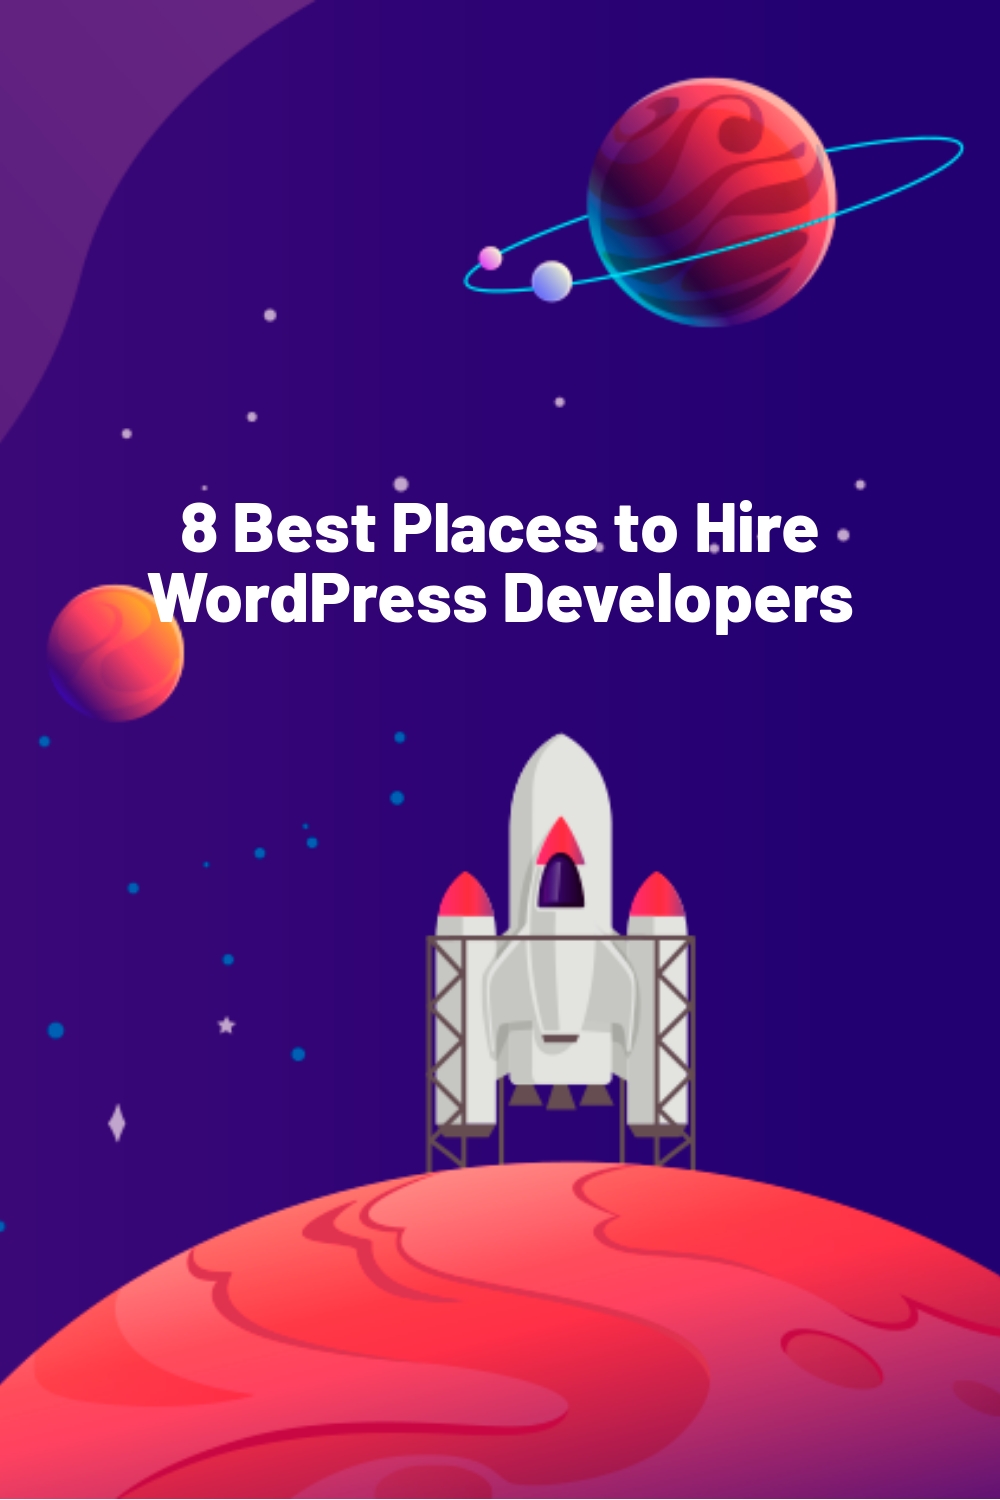 8 Best Places to Hire WordPress Developers